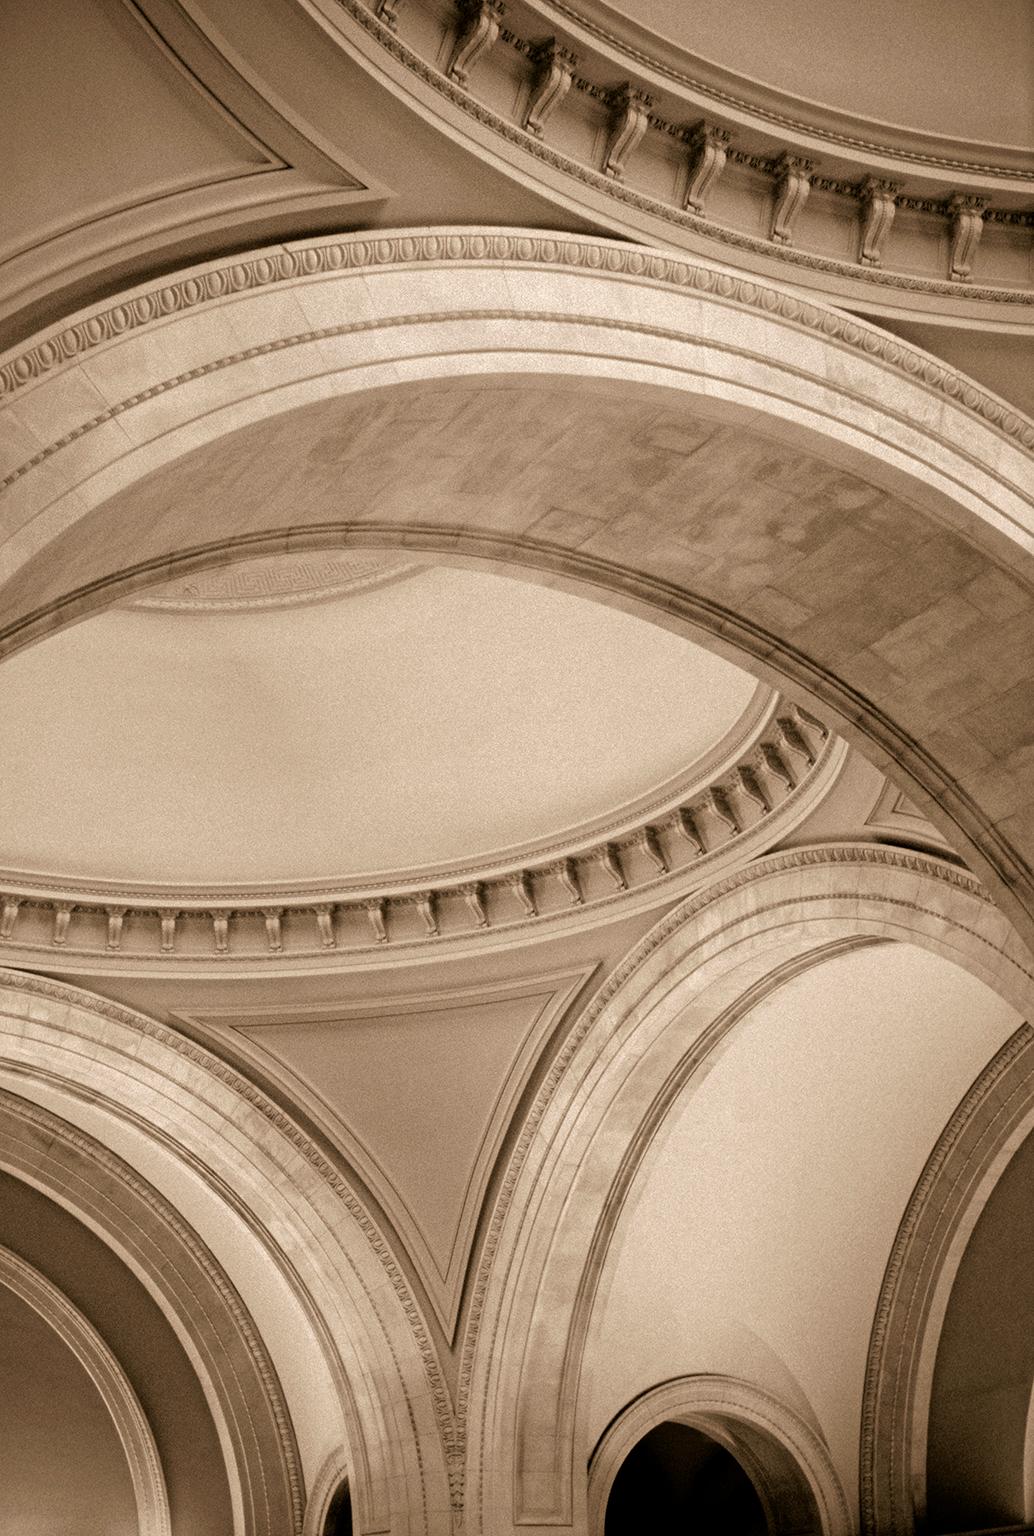  Cosmo Condina Black and White Photograph - Symphony of Arches. New York City, USA, 2001